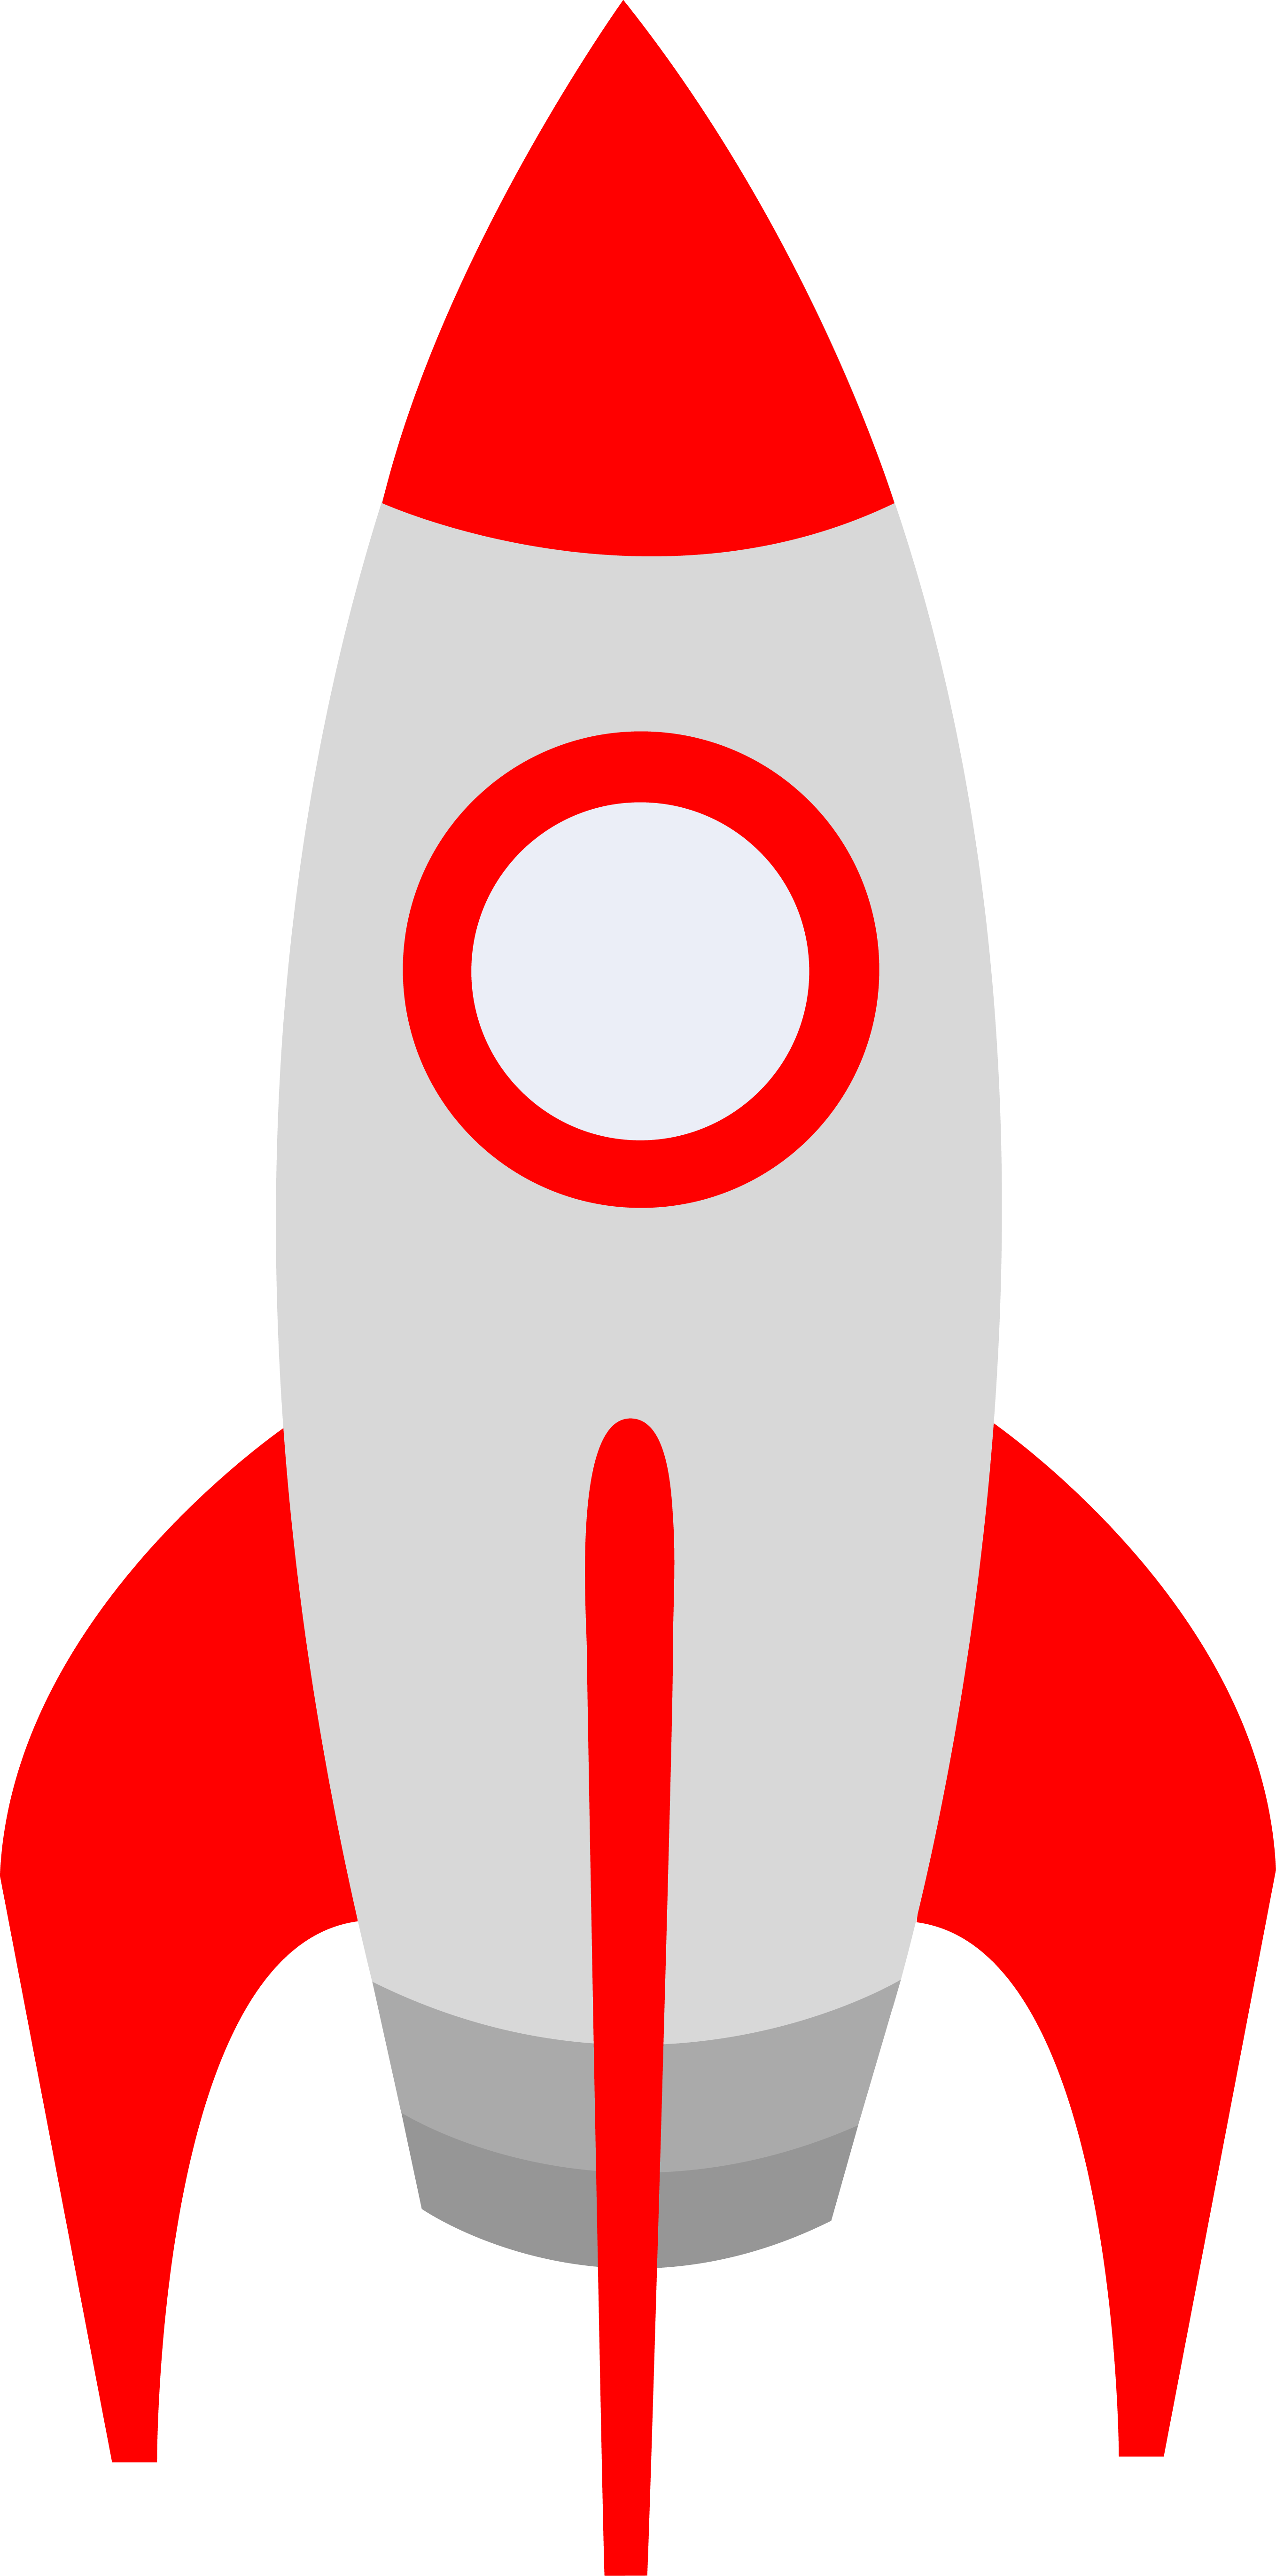 Rockets png images free. Spaceship clipart missile launch